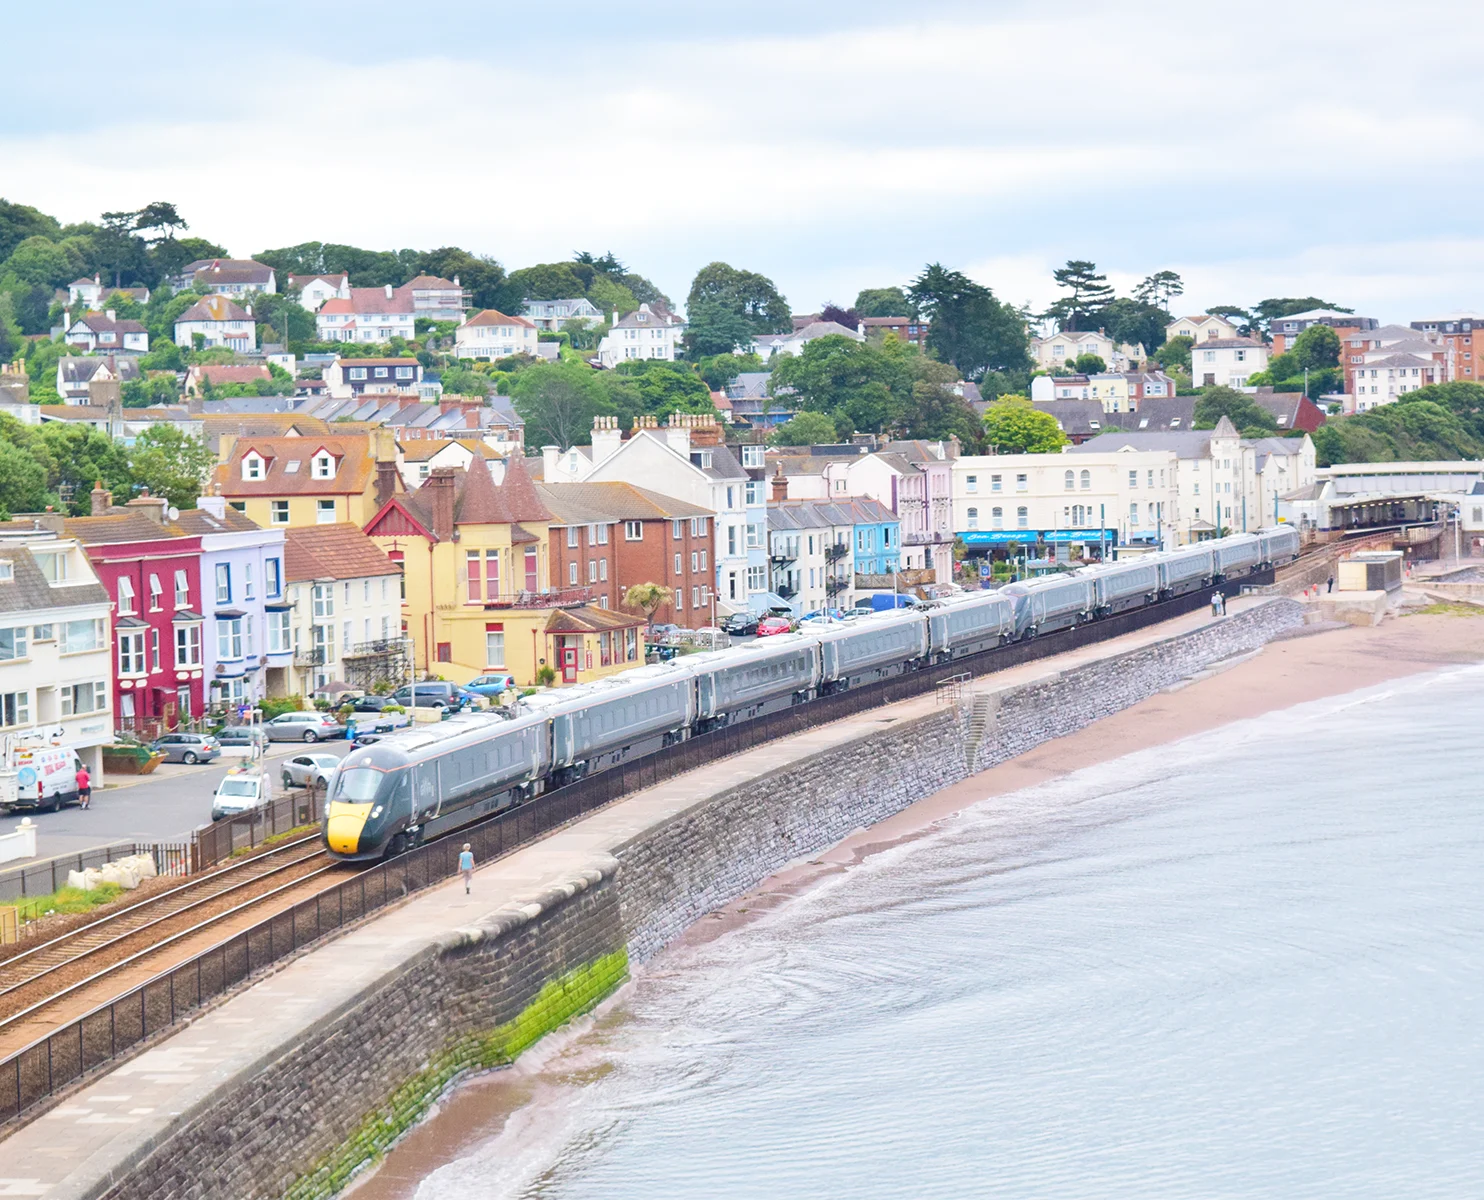 A train going along a track next to a beach with colourful houses and trees on the other side of the tracks.